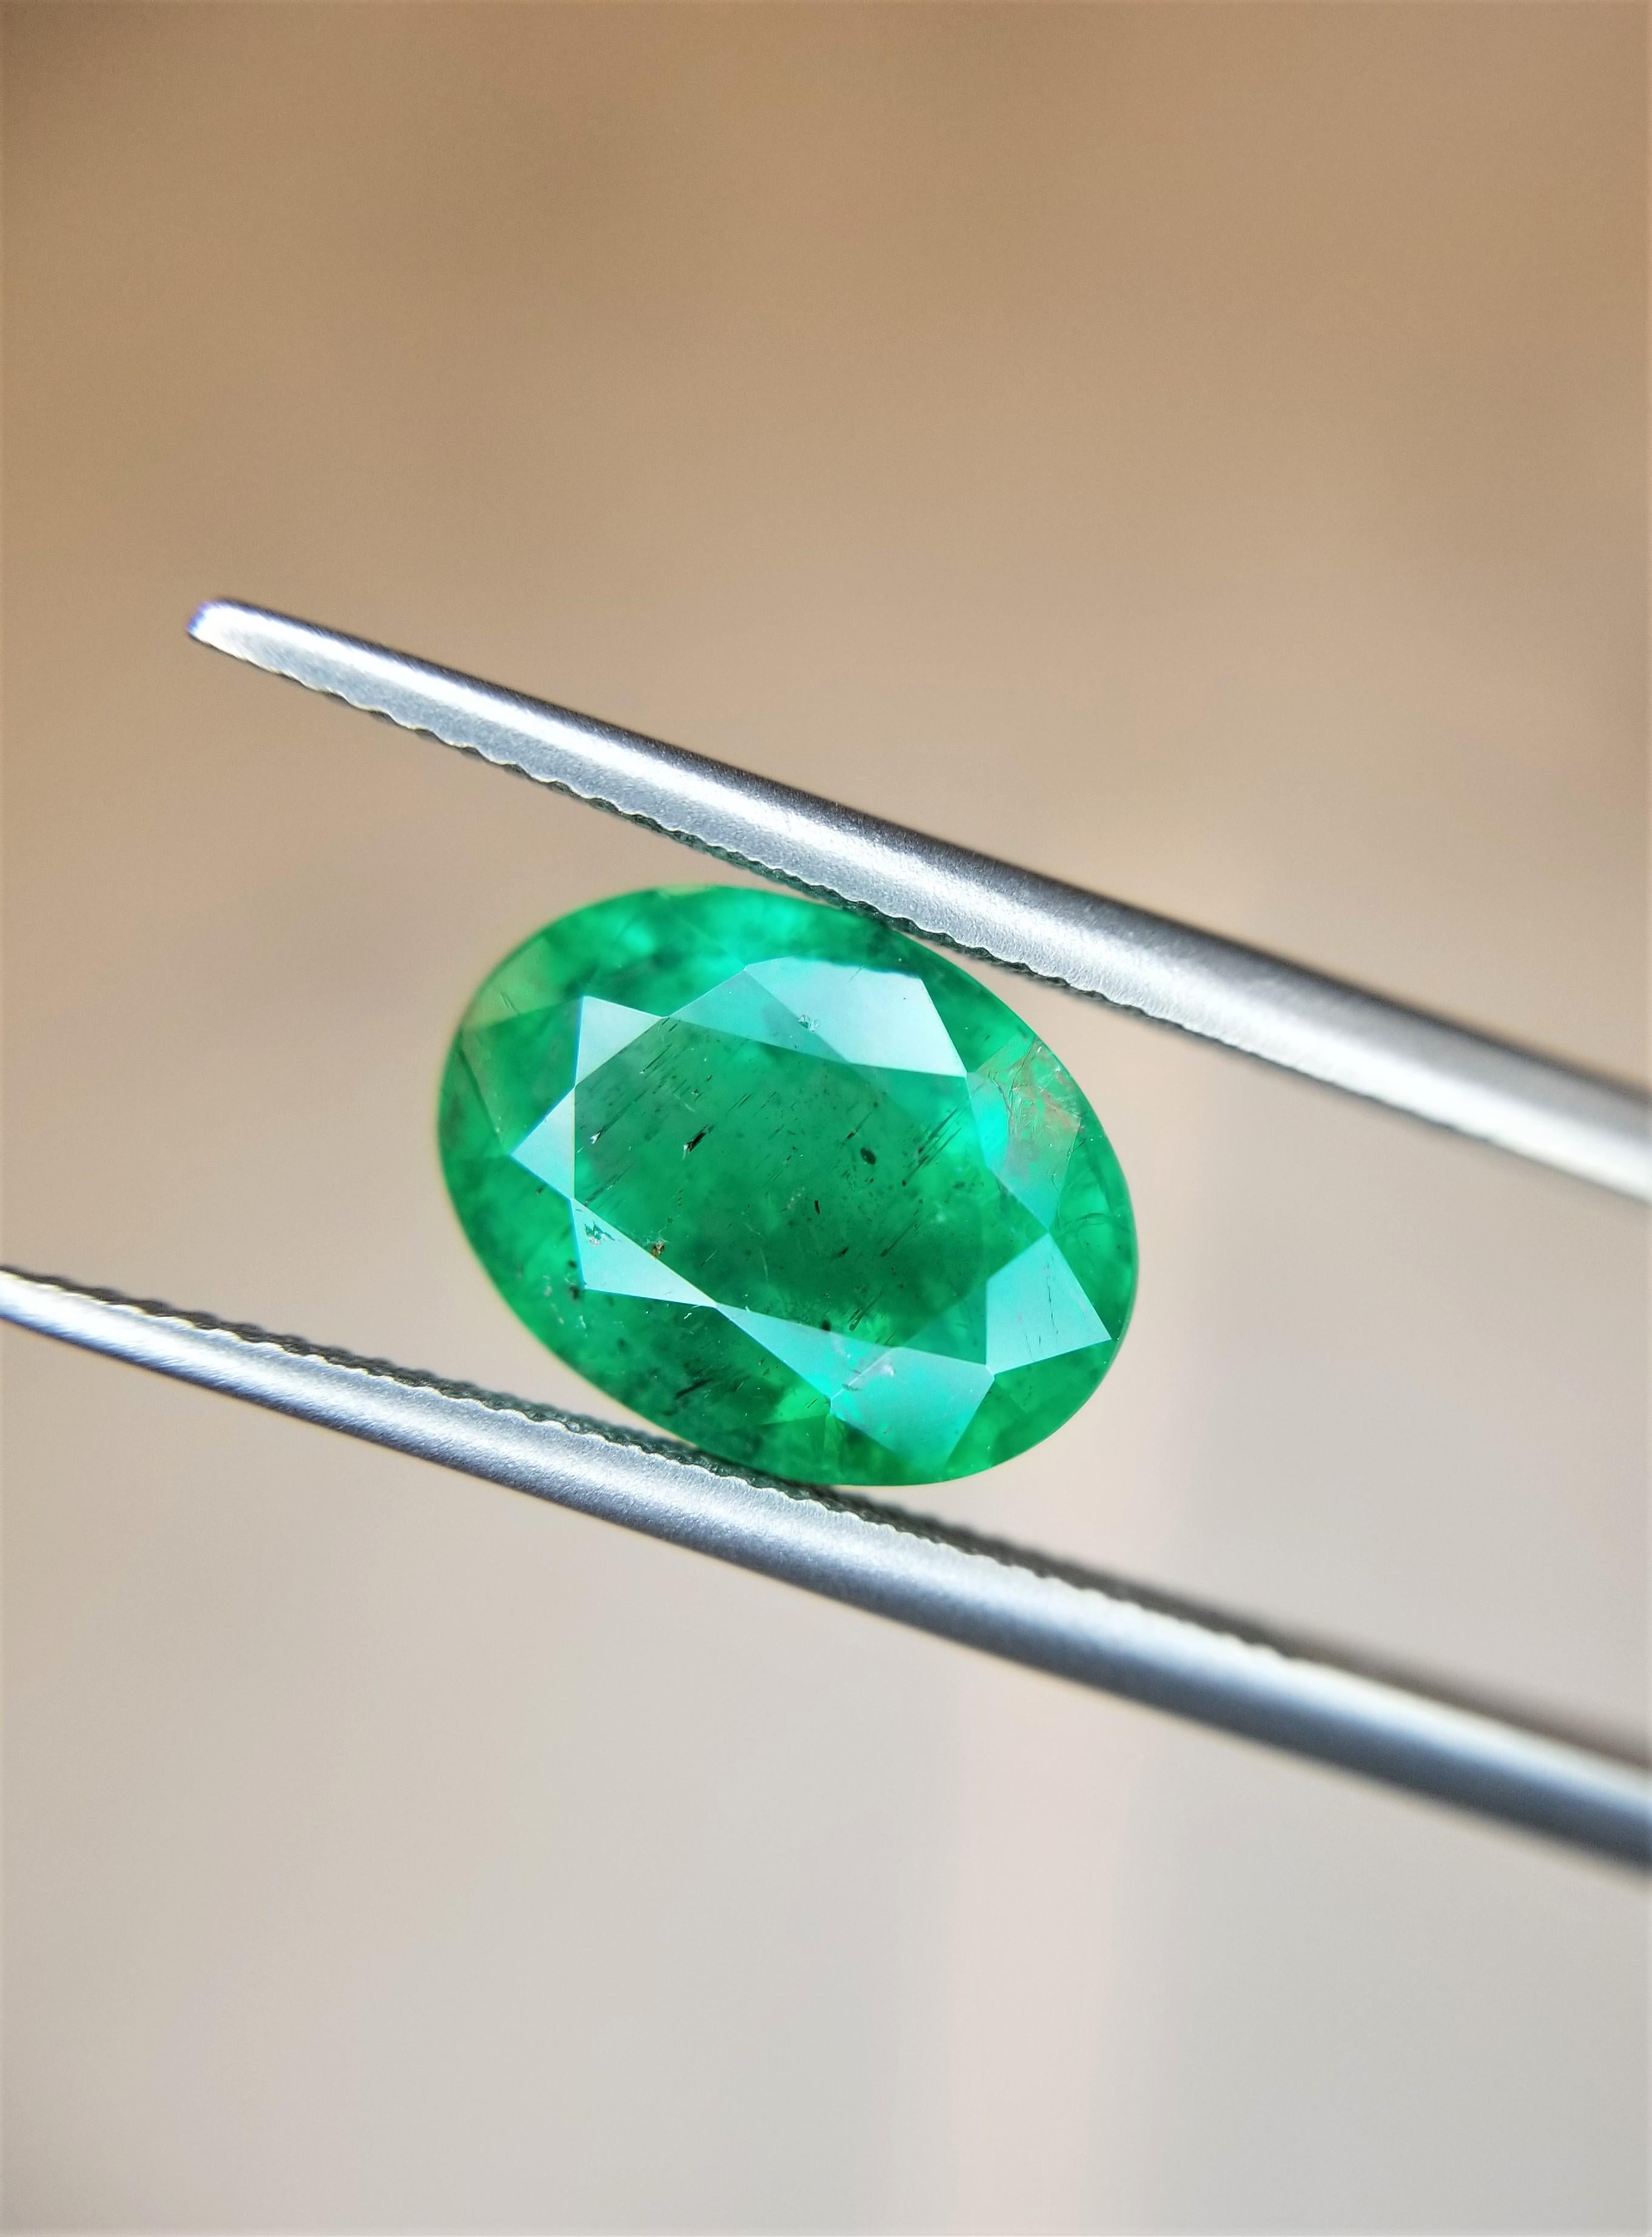 Contemporary 2.9 Ct Weight Oval Shaped Green Color IGITL Certified Emerald Gemstone Pendant For Sale